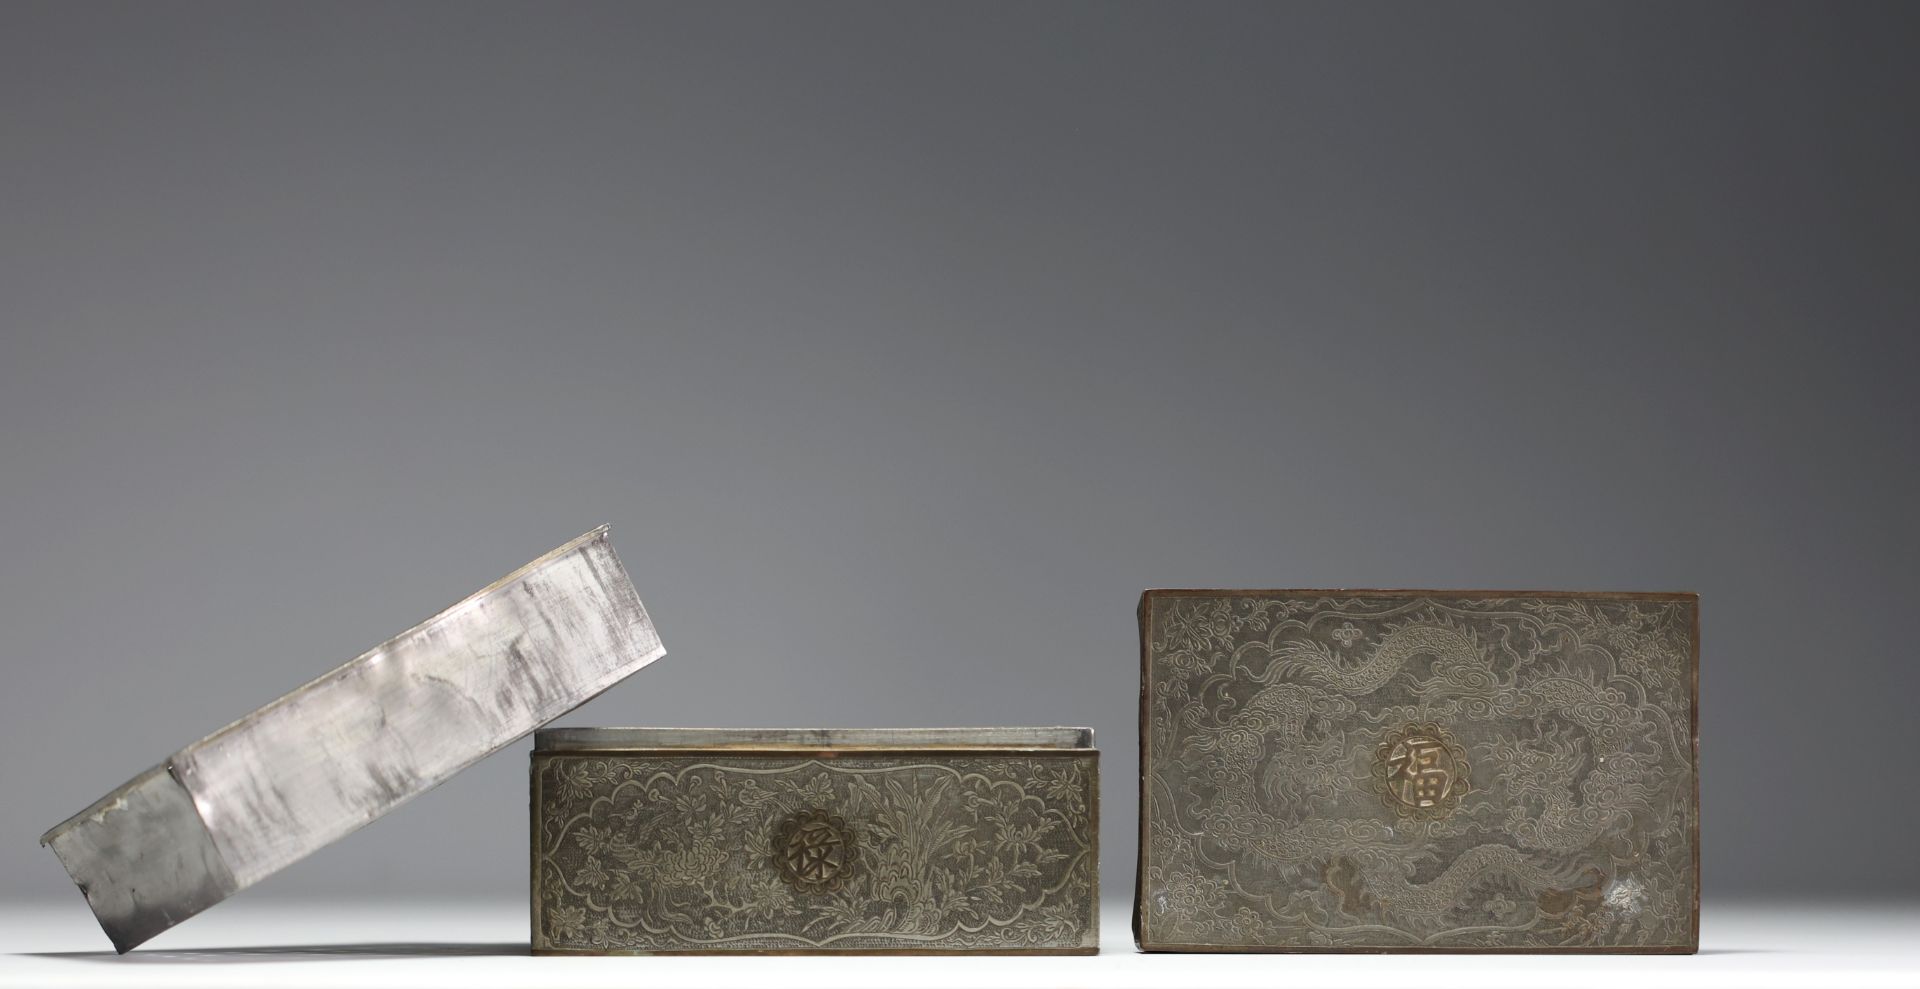 China - Pewter and copper tobacco drying case with dragon decoration, late 19th century. - Image 4 of 4